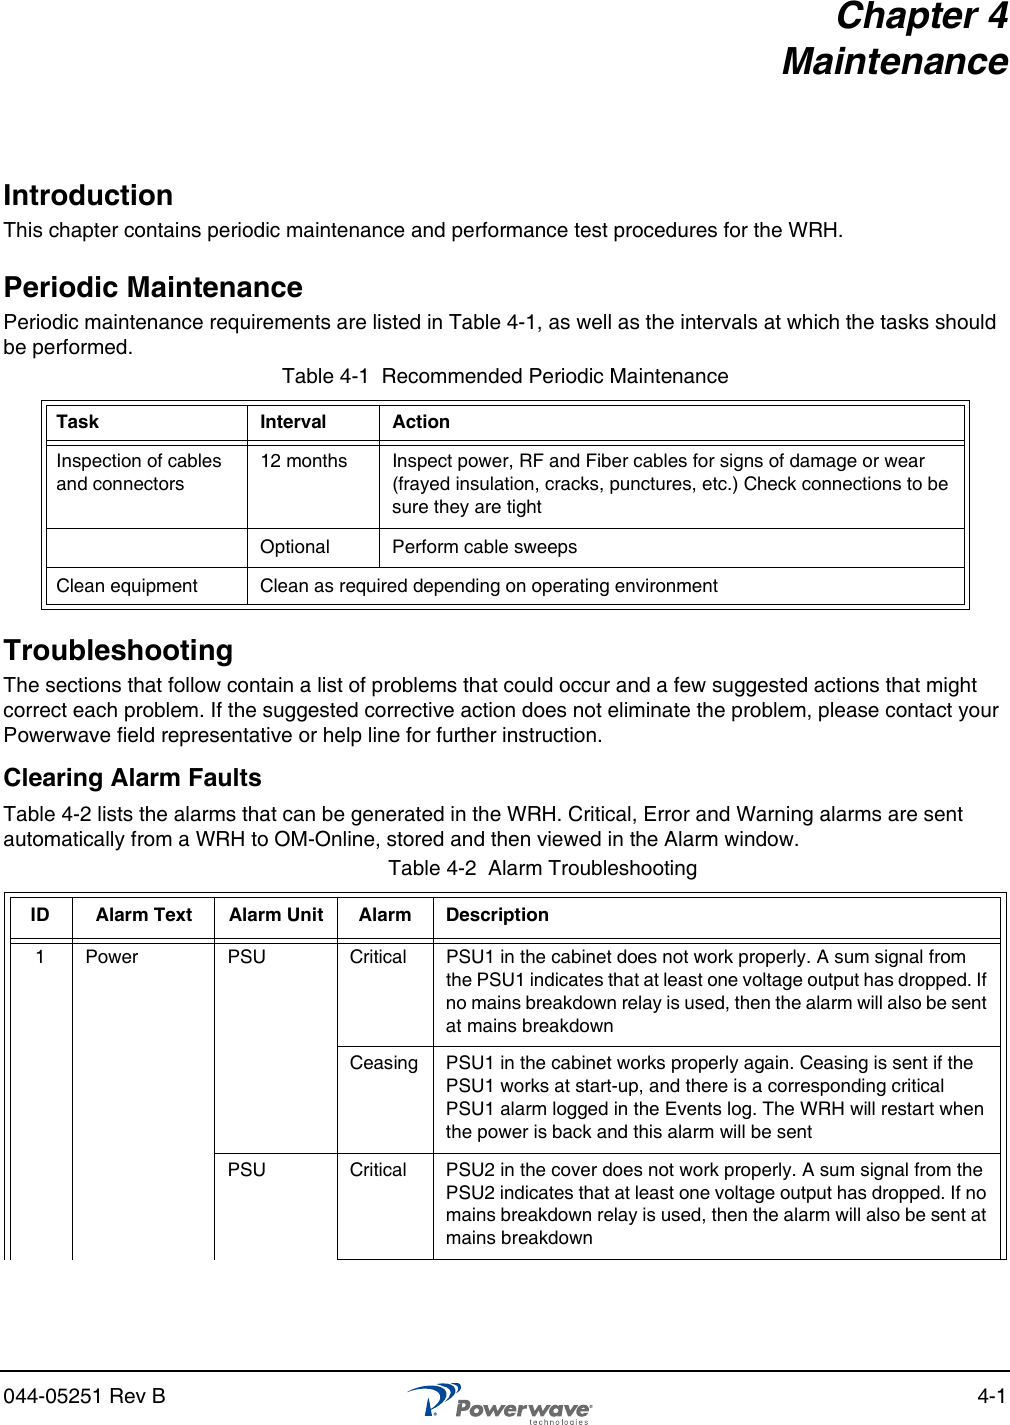 044-05251 Rev B 4-1Chapter 4 MaintenanceIntroductionThis chapter contains periodic maintenance and performance test procedures for the WRH.Periodic MaintenancePeriodic maintenance requirements are listed in Table 4-1, as well as the intervals at which the tasks should be performed.TroubleshootingThe sections that follow contain a list of problems that could occur and a few suggested actions that might correct each problem. If the suggested corrective action does not eliminate the problem, please contact your Powerwave field representative or help line for further instruction.Clearing Alarm FaultsTable 4-2 lists the alarms that can be generated in the WRH. Critical, Error and Warning alarms are sent automatically from a WRH to OM-Online, stored and then viewed in the Alarm window.Table 4-1  Recommended Periodic MaintenanceTask Interval ActionInspection of cables and connectors12 months Inspect power, RF and Fiber cables for signs of damage or wear (frayed insulation, cracks, punctures, etc.) Check connections to be sure they are tightOptional Perform cable sweepsClean equipment Clean as required depending on operating environmentTable 4-2  Alarm Troubleshooting ID Alarm Text Alarm Unit Alarm Description1Power PSU Critical PSU1 in the cabinet does not work properly. A sum signal from the PSU1 indicates that at least one voltage output has dropped. If no mains breakdown relay is used, then the alarm will also be sent at mains breakdownCeasing PSU1 in the cabinet works properly again. Ceasing is sent if the PSU1 works at start-up, and there is a corresponding critical PSU1 alarm logged in the Events log. The WRH will restart when the power is back and this alarm will be sentPSU Critical PSU2 in the cover does not work properly. A sum signal from the PSU2 indicates that at least one voltage output has dropped. If no mains breakdown relay is used, then the alarm will also be sent at mains breakdown